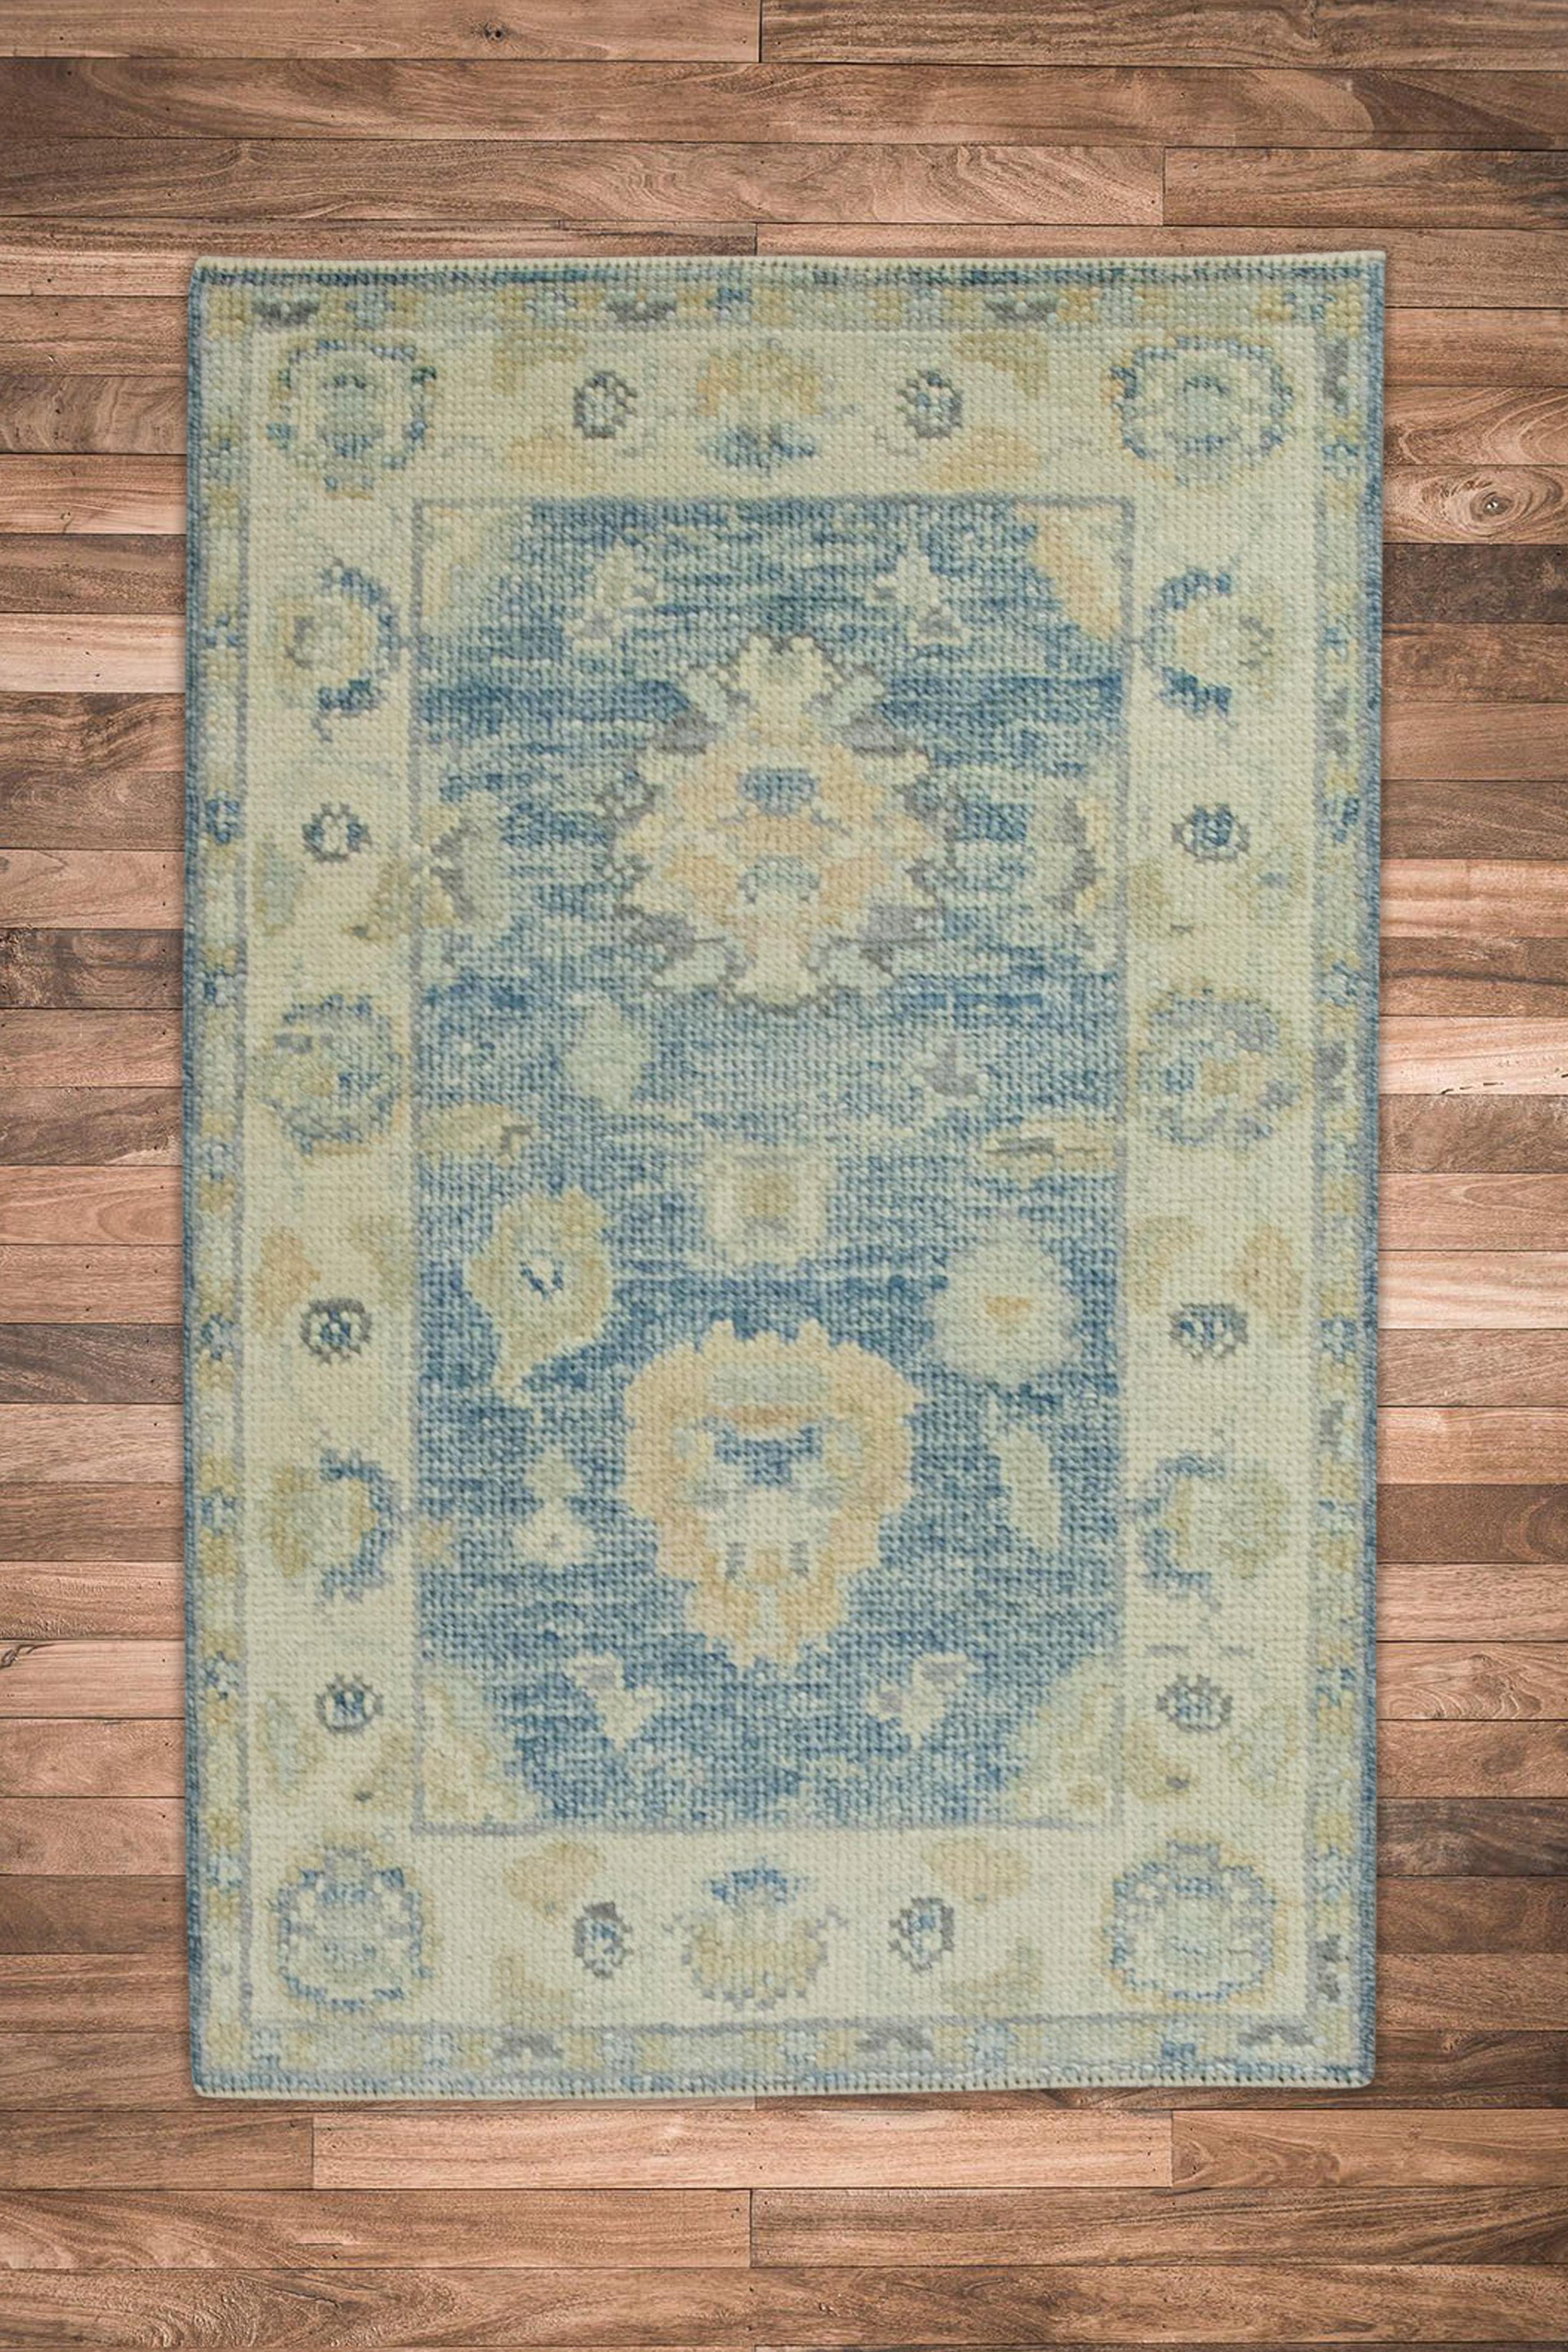 Contemporary Blue Floral Design Handwoven Wool Turkish Oushak Rug For Sale